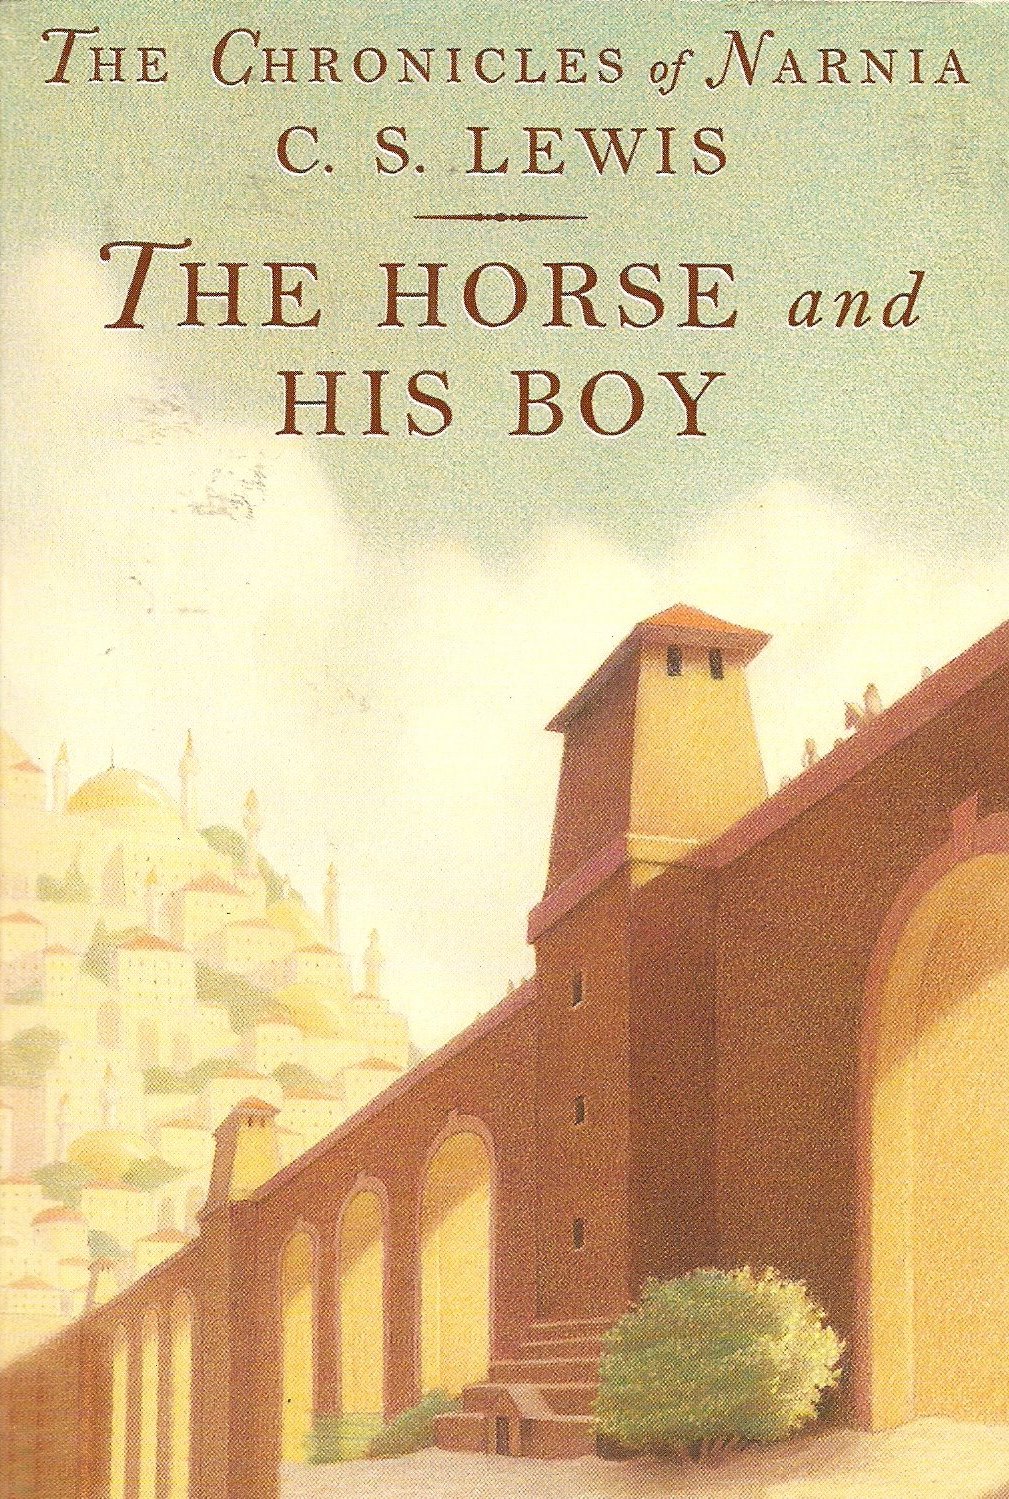 [EPUB] The Chronicles of Narnia (Publication Order) #5 The Horse and His Boy by C.S. Lewis